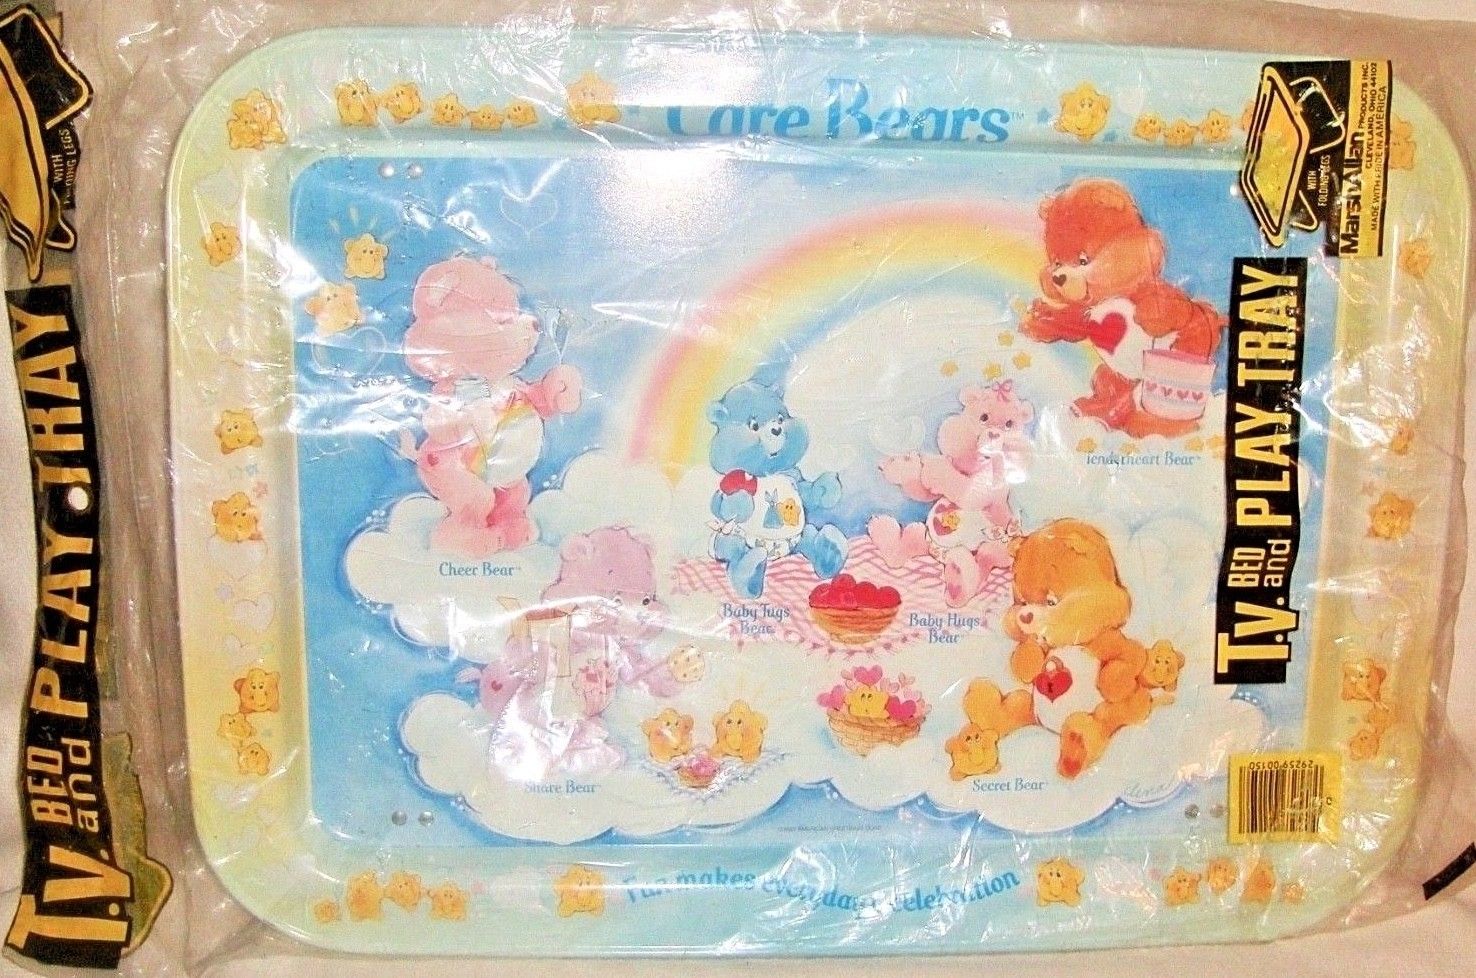 VINTAGE 1985 CARE BEARS METAL FOLDING TV SNACK TRAY - MINT!!! NEW OLD STOCK